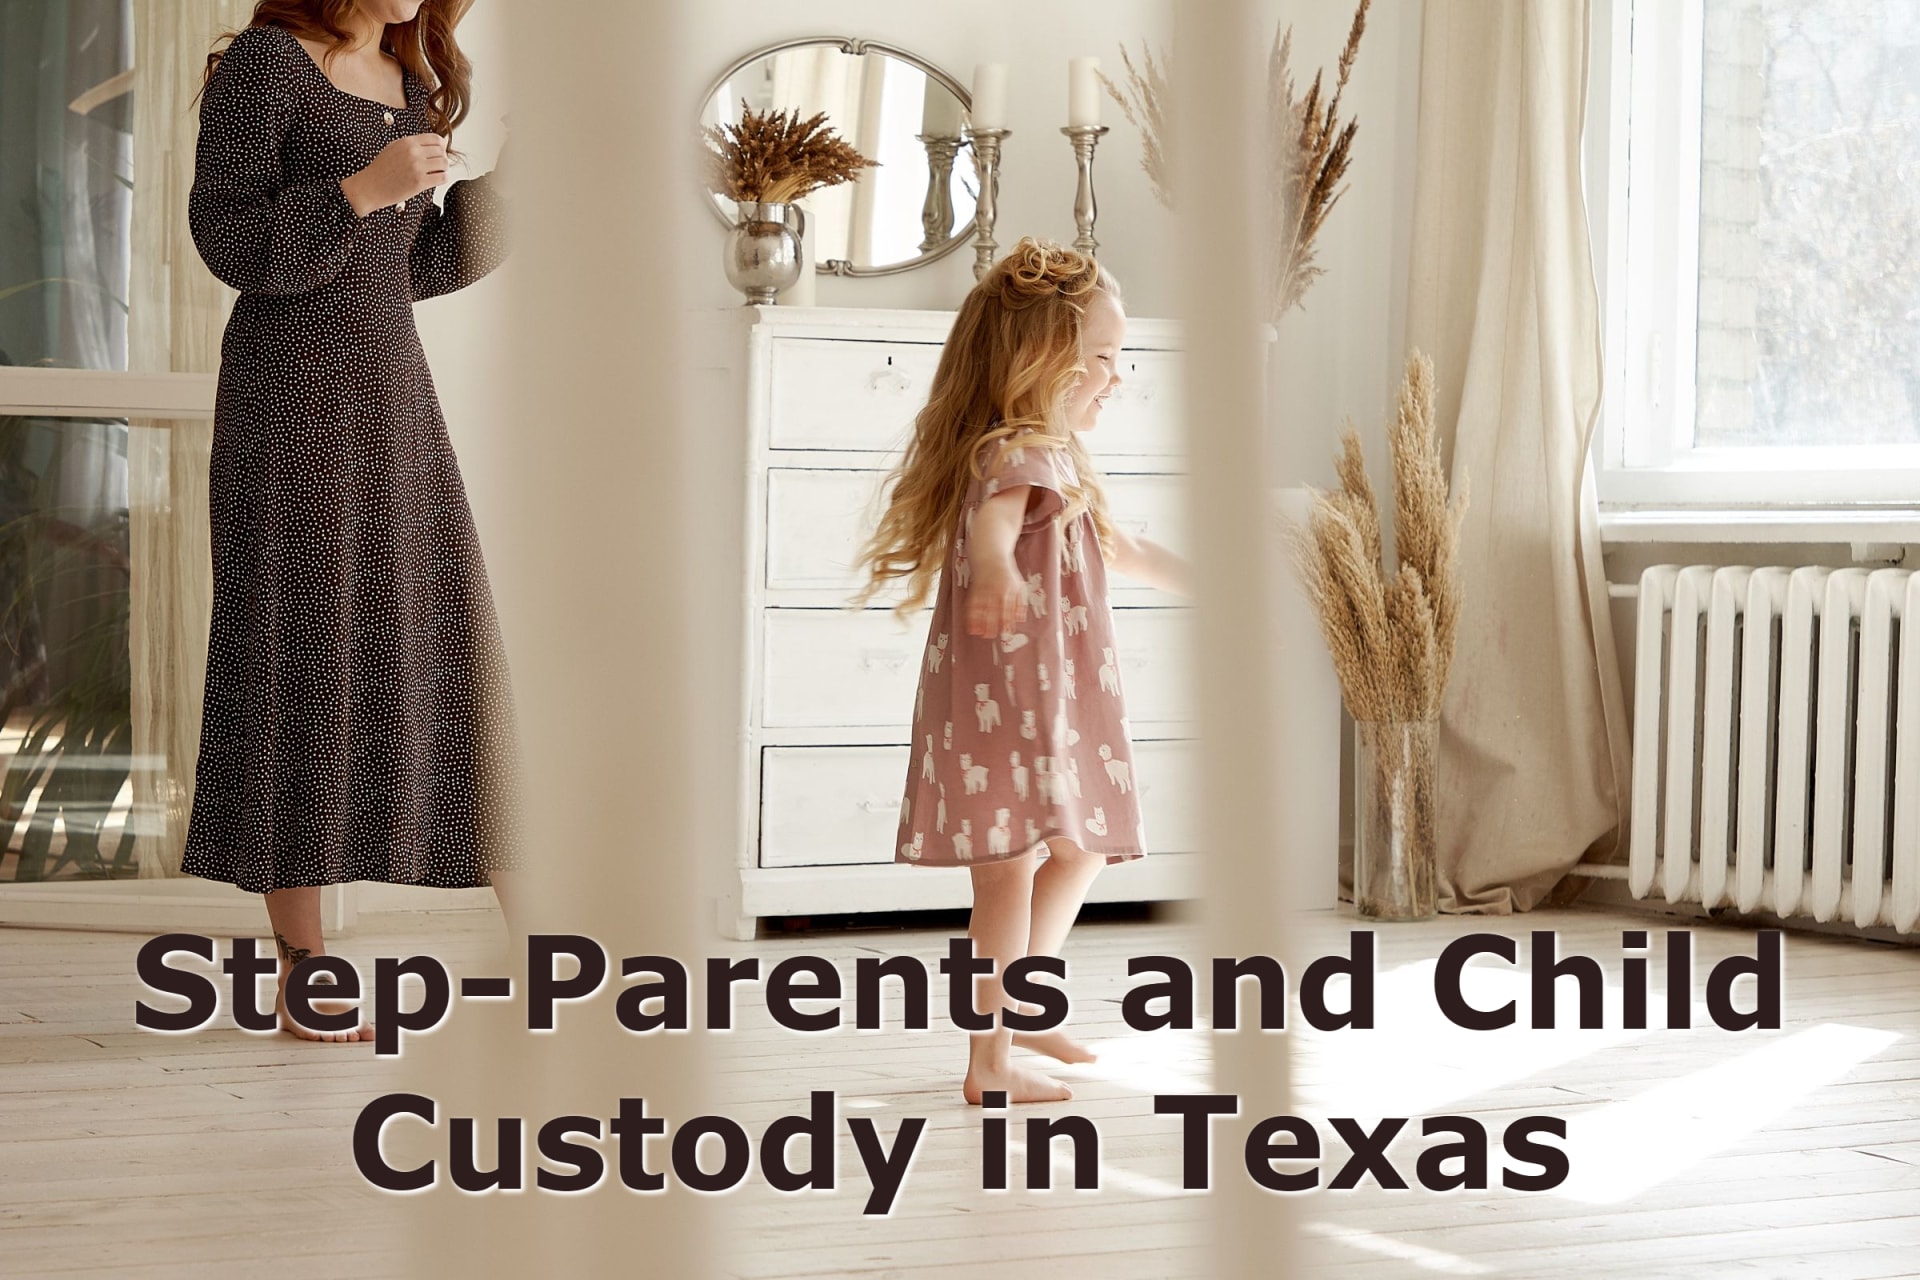 Step-Parents and Child Custody in Texas